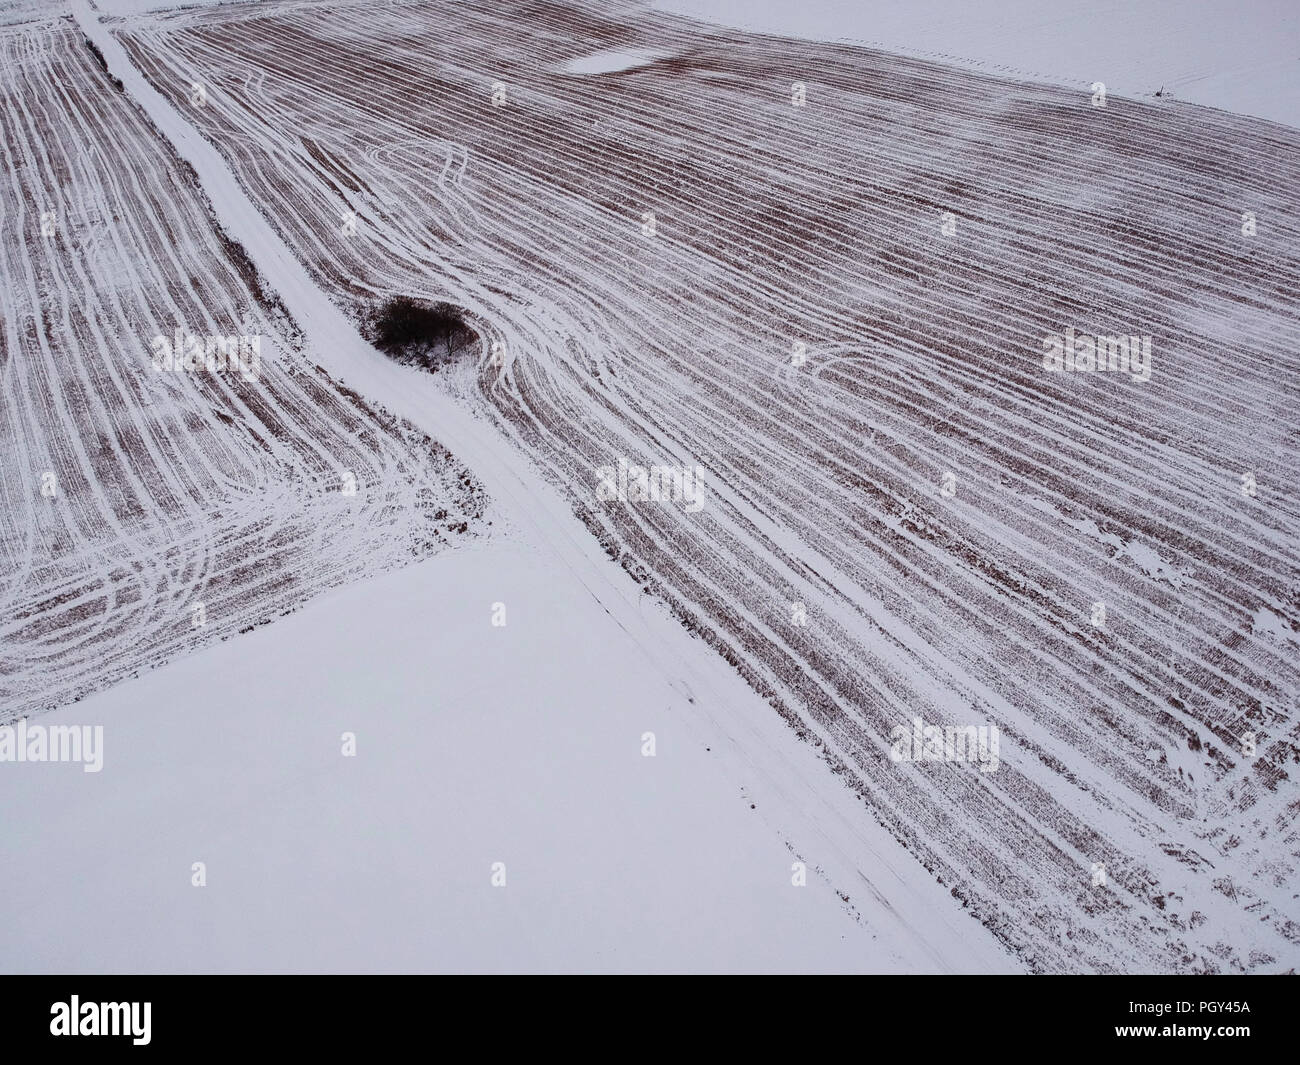 winter wheat stubble agriculture field with snow, aerial view Stock Photo